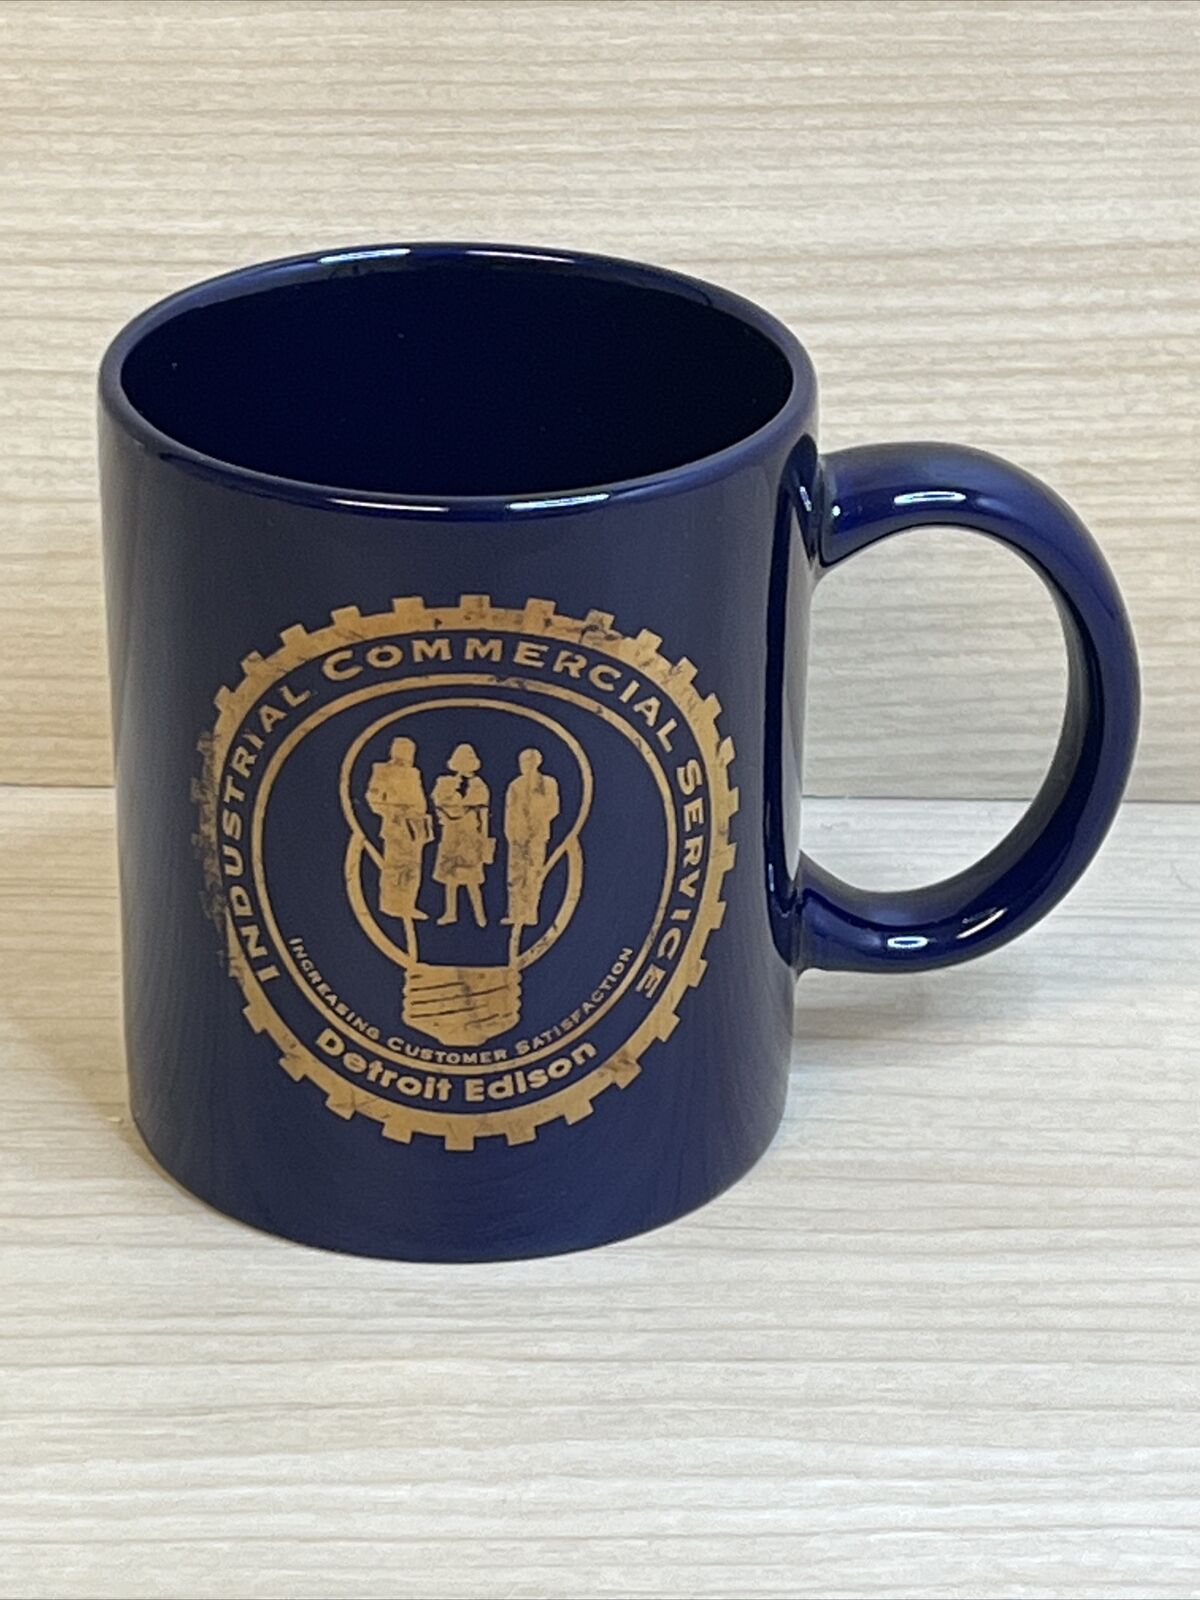 Detroit Edison Blue Gold Coffee Mug Cup Industrial Commercial Service